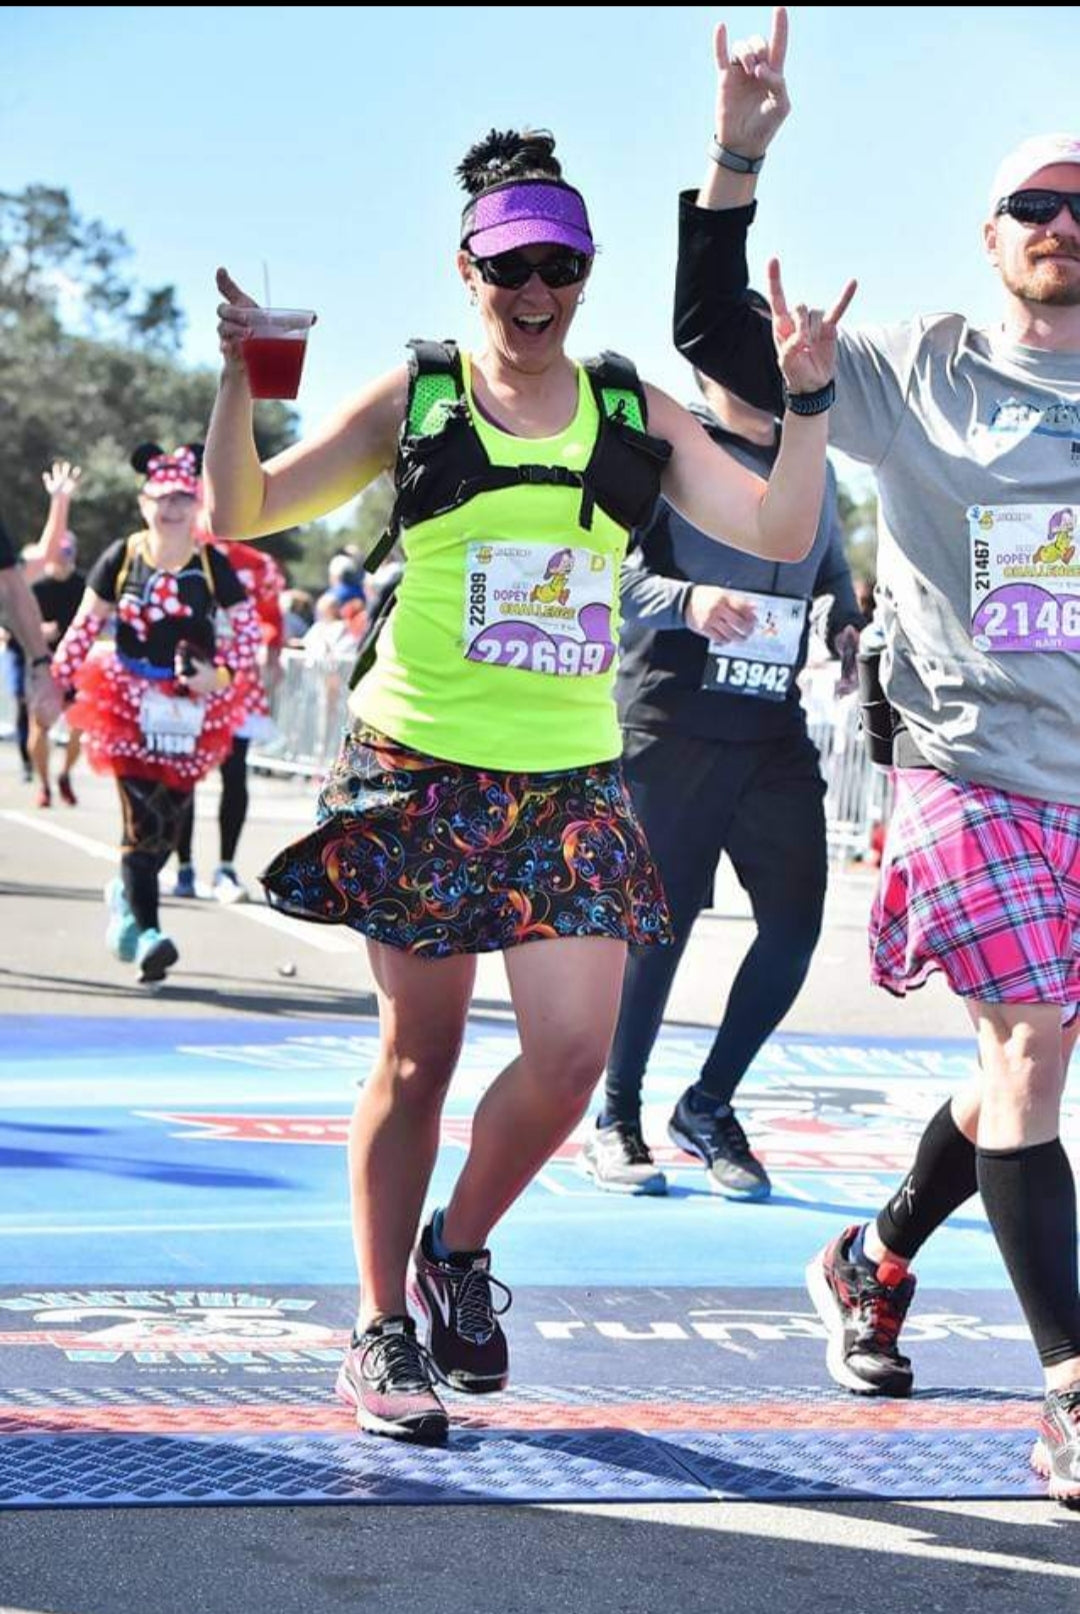 Melissa Marowelli finishing a race with drink in hand wearing a Bolder Athletic Wear skirt